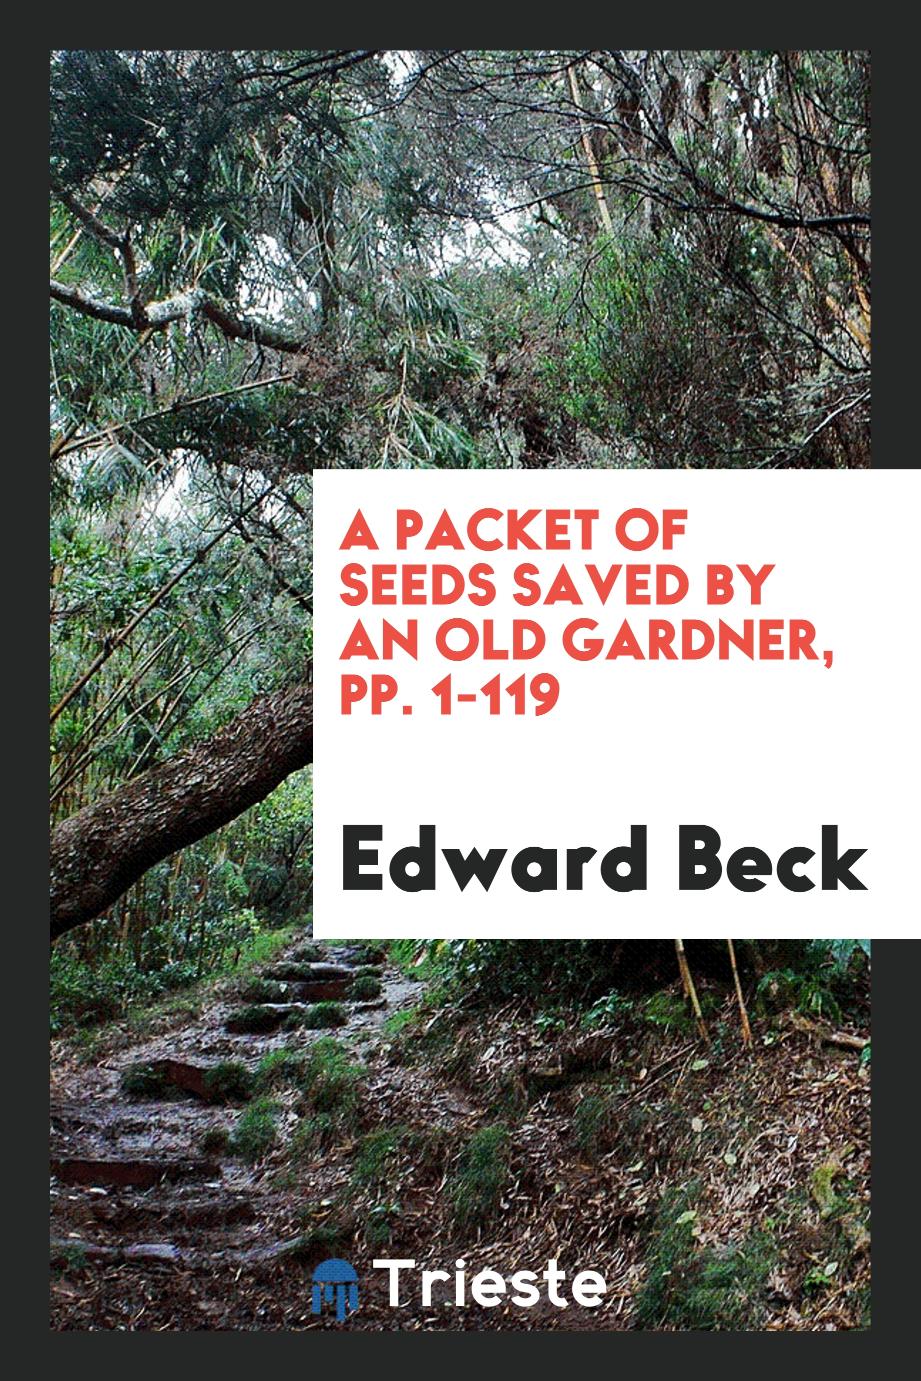 A Packet of Seeds Saved by an Old Gardner, pp. 1-119